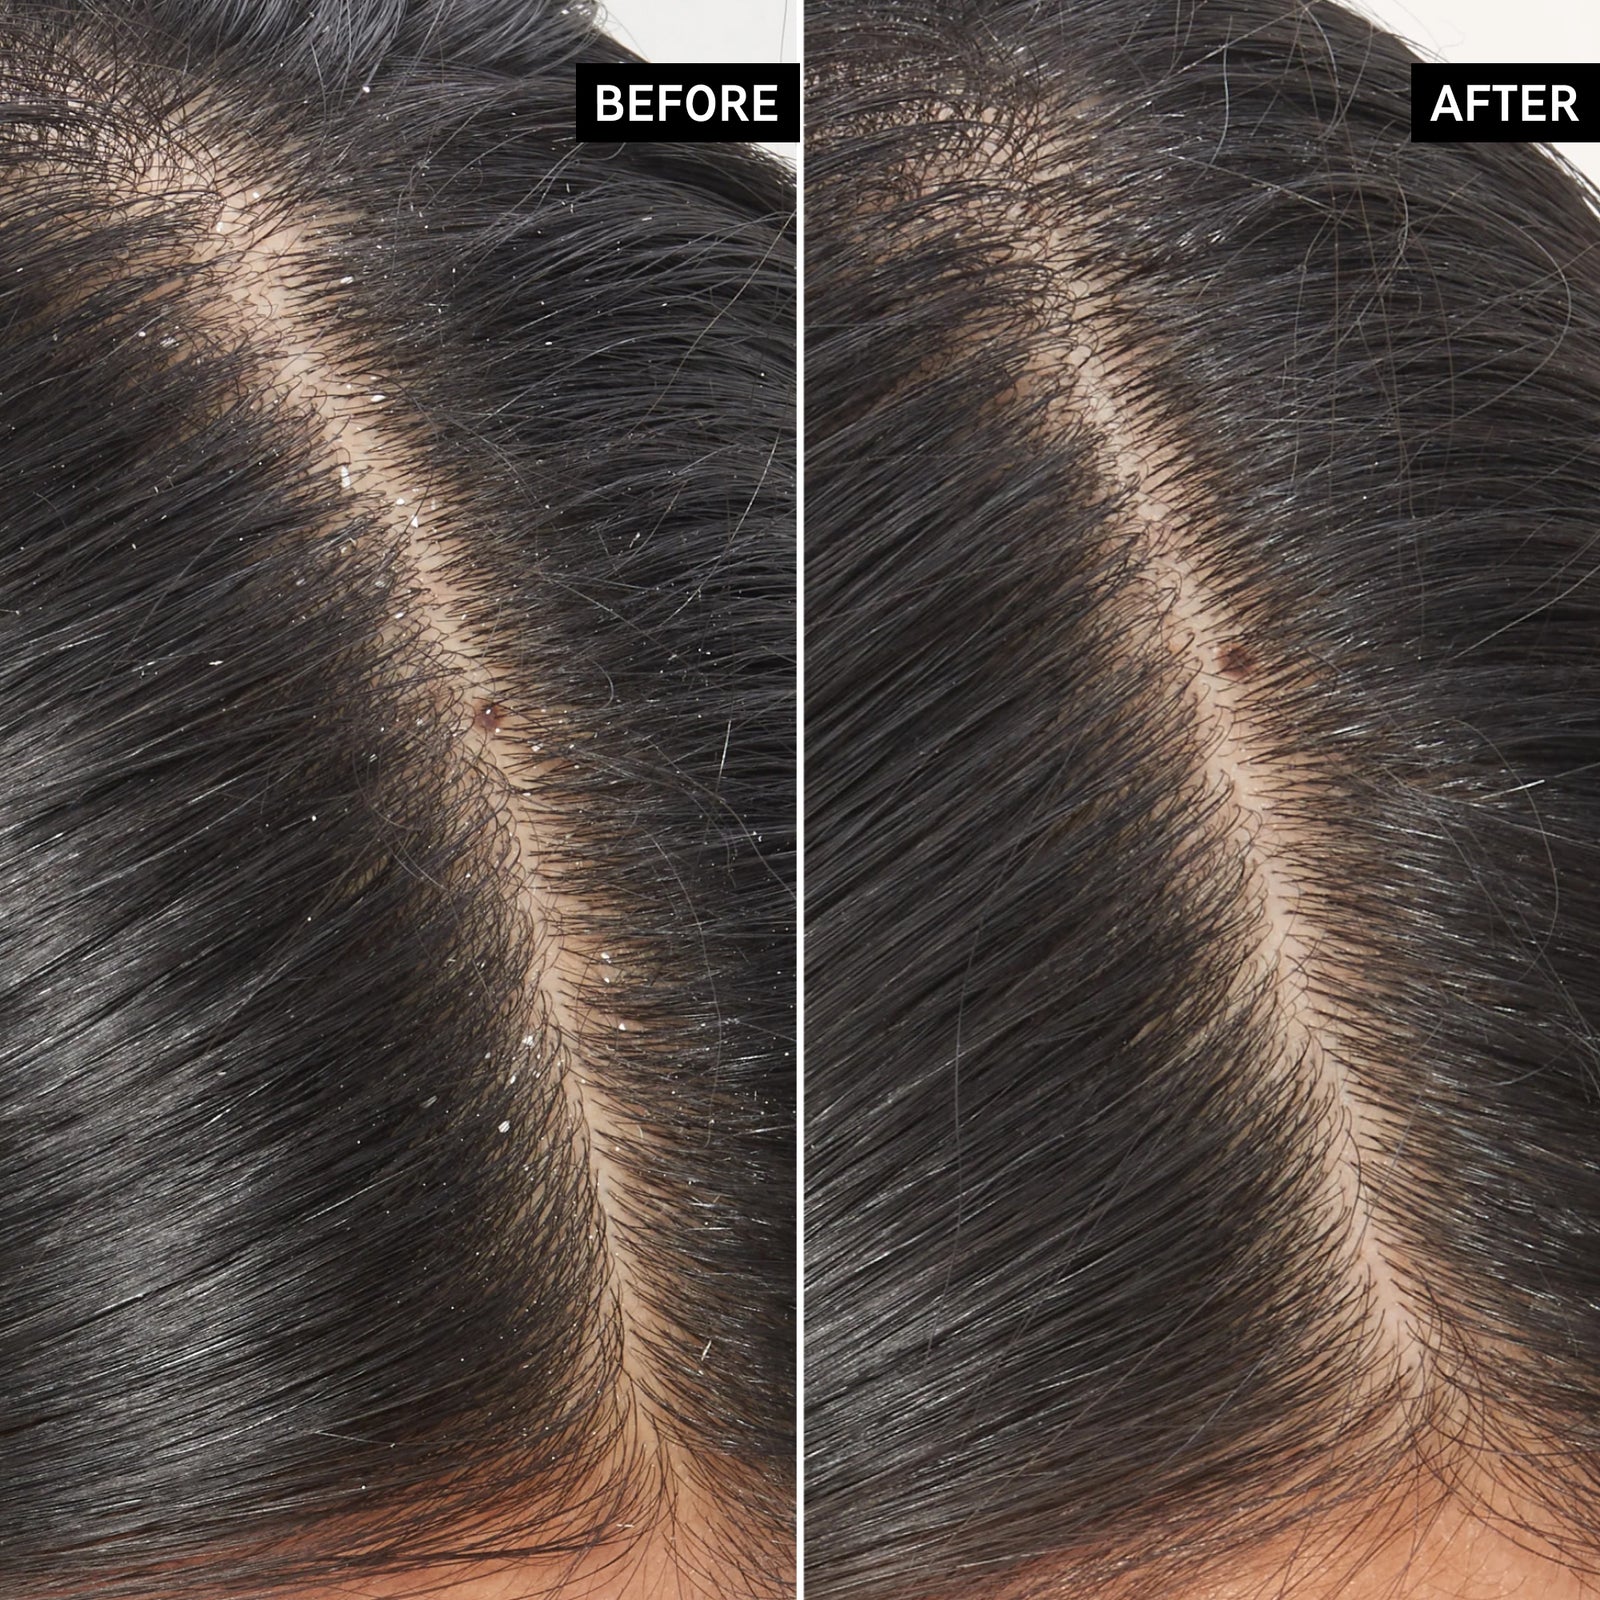 Before and after using salicylic acid scalp treatment